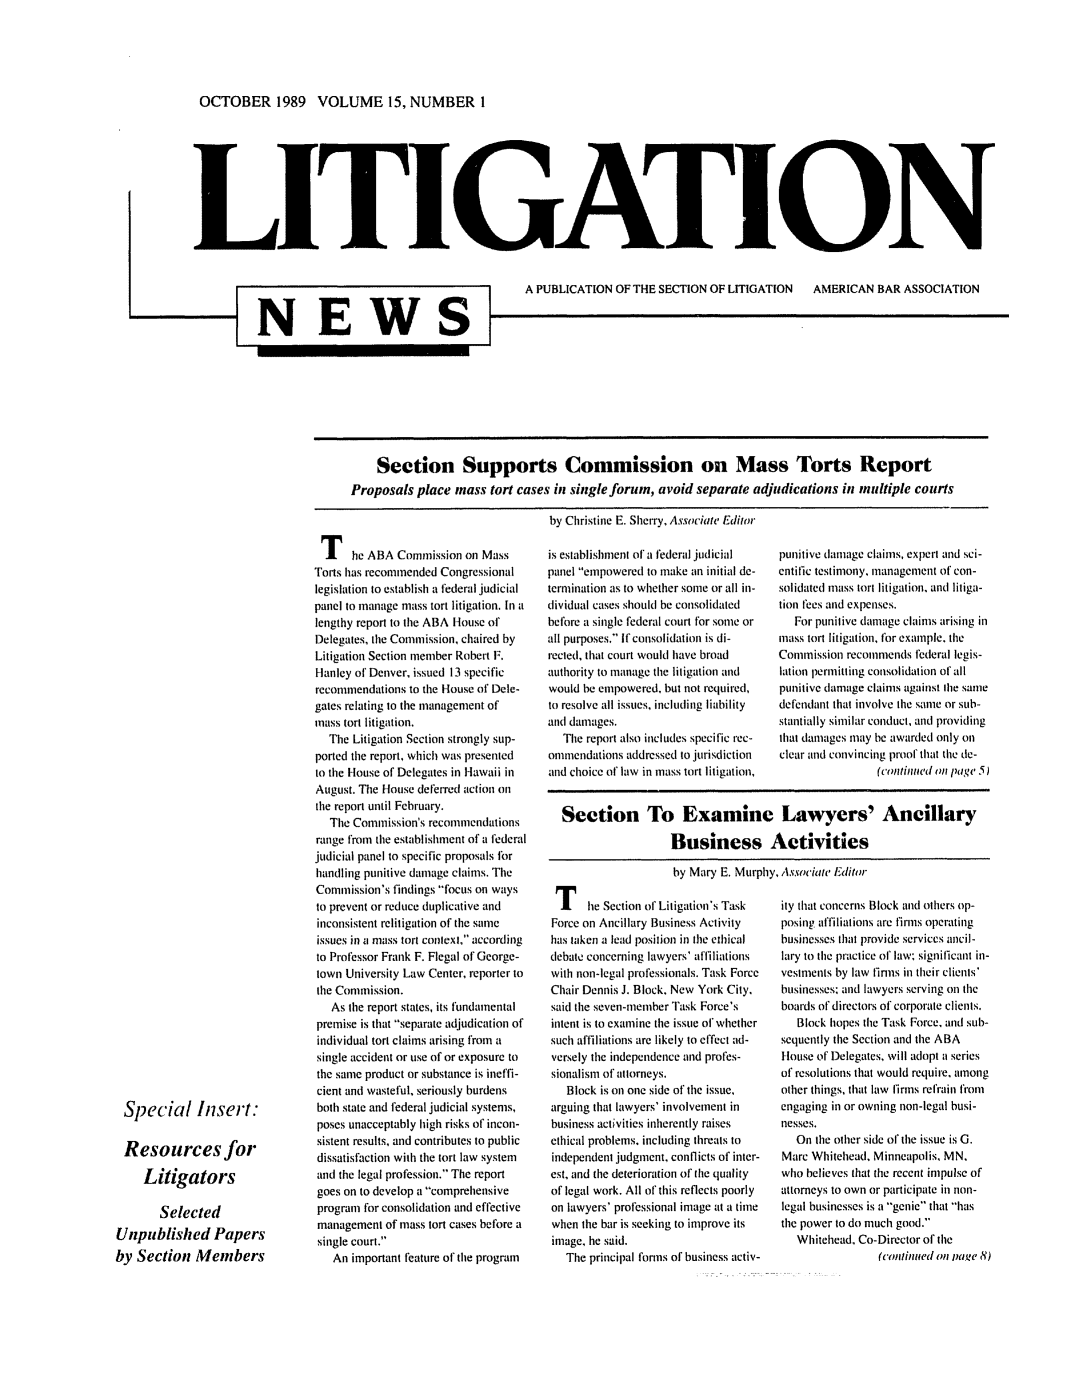 handle is hein.journals/lignws15 and id is 1 raw text is: OCTOBER 1989 VOLUME 15, NUMBER I

LITIC ATIO N

NEWS

A PUBLICATION OF THE SECTION OF LITIGATION  AMERICAN BAR ASSOCIATION

Section Supports Commission on Mass Torts Report
Proposals place mass tort cases in single forum, avoid separate adjudications in multiple courts
by Christine E. Sherry, Associate Editor

The ABA Commission on Mass
Torts has recommended Congressional
legislation to establish a federal judicial
panel to manage mass tort litigation. In a
lengthy report to the ABA House of
Delegates, the Commission, chaired by
Litigation Section member Robert F.
Hanley of Denver, issued 13 specific
recommendations to the House of Dele-
gates relating to the management of
mass tort litigation.
The Litigation Section strongly sup-
ported the report, which was presented
to the House of Delegates in Hawaii in
August. The House deferred action on
the report until February.
The Commission's recommendations
range from the establishment of a federal
judicial panel to specific proposals lbr
handling punitive damage claims. The
Commission's findings focus on ways
to prevent or reduce duplicative and
inconsistent relitigation of the same
issues in a mass tort context, according
to Professor Frank F. Flegal of George-
town University Law Center, reporter to
the Commission.
As the report states, its fundamental
premise is that separate adjudication of
individual tort claims arising from a
single accident or use of or exposure to
the same product or substance is ineffi-
cient and wasteful, seriously burdens
both state and federal judicial systems,
poses unacceptably high risks of incon-
sistent results, and contributes to public
dissatisfaction with the tort law system
and the legal profession. The report
goes on to develop a 'comprehensive
program for consolidation and effective
management of mass tort cases before a
single court.
An important feature of the program

is establishment of a federal judicial
panel empowered to make an initial de-
termination as to whether some or all in-
dividual cases should be consolidated
before a single federal court for some or
all purposes. If consolidation is di-
rected, that court would have broad
authority to manage the litigation and
would be empowered, but not required,
to resolve all issues, including liability
and damages.
The report also includes specific rec-
ommendations addressed to jurisdiction
and choice of law in mass tort litigation,

punitive damage claims, expert and sci-
entific testimony. management of con-
solidated mass tort litigation, and litiga-
tion fees and expenses.
For punitive damage claims arising in
mass tort litigation, for example, the
Commission recommends federal legis-
lation permitting consolidation of all
punitive damage claims against Ihe same
defendant that involve the same or sub-
stantially similar conduct, and providing
that damages may be awarded only on
clear and convincing proof that the de-
(continued on page 5)

Section To Examine Lawyers' Ancillary
Business Activities
by Mary E. Murphy, Associate FEditor

T he Section of Litigation's Task
Force on Ancillary Business Activity
has taken a lead position in the ethical
debate concerning lawyers' affiliations
with non-legal professionals. Task Force
Chair Dennis J. Block, New York City,
said the seven-nember Task Force's
intent is to examine the issue of whether
such affiliations are likely to effect ad-
versely the independence and profes-
sionalism of attorneys.
Block is on one side of the issue,
arguing that lawyers' involvement in
business activities inherently raises
ethical problems. including ihreats to
independent judgment, conflicts of inter-
est, and the deterioration of the quality
of legal work. All of this reflects poorly
on lawyers' professional image at a time
when the bar is seeking to improve its
image, he said.
The principal forns of business activ-

ity that concerns Block and others op-
posing affiliations are finis operating
businesses that provide services ancil-
lary to the practice of law; significant in-
vestments by law finns in their clients'
businesses; and lawyers serving on the
boards of directors of corporate clients.
Block hopes the Task Force, and sub-
sequently the Section and the ABA
House of Delegates, will adopt a series
of resolutions that would require, among
other things, that law firms refrain from
engaging in or owning non-legal busi-
nesses.
On the other side of the issue is G.
Marc Whitehead, Minneapolis, MN,
who believes that the recent impulse of
attorneys to own or participate in non-
legal businesses is a genie that has
the power to do much good.
Whitehead, Co-Director of the
(contlinued on vage 8)

Special Insert:
Resources for
Litigators
Selected
Unpublished Papers
by Section Members


